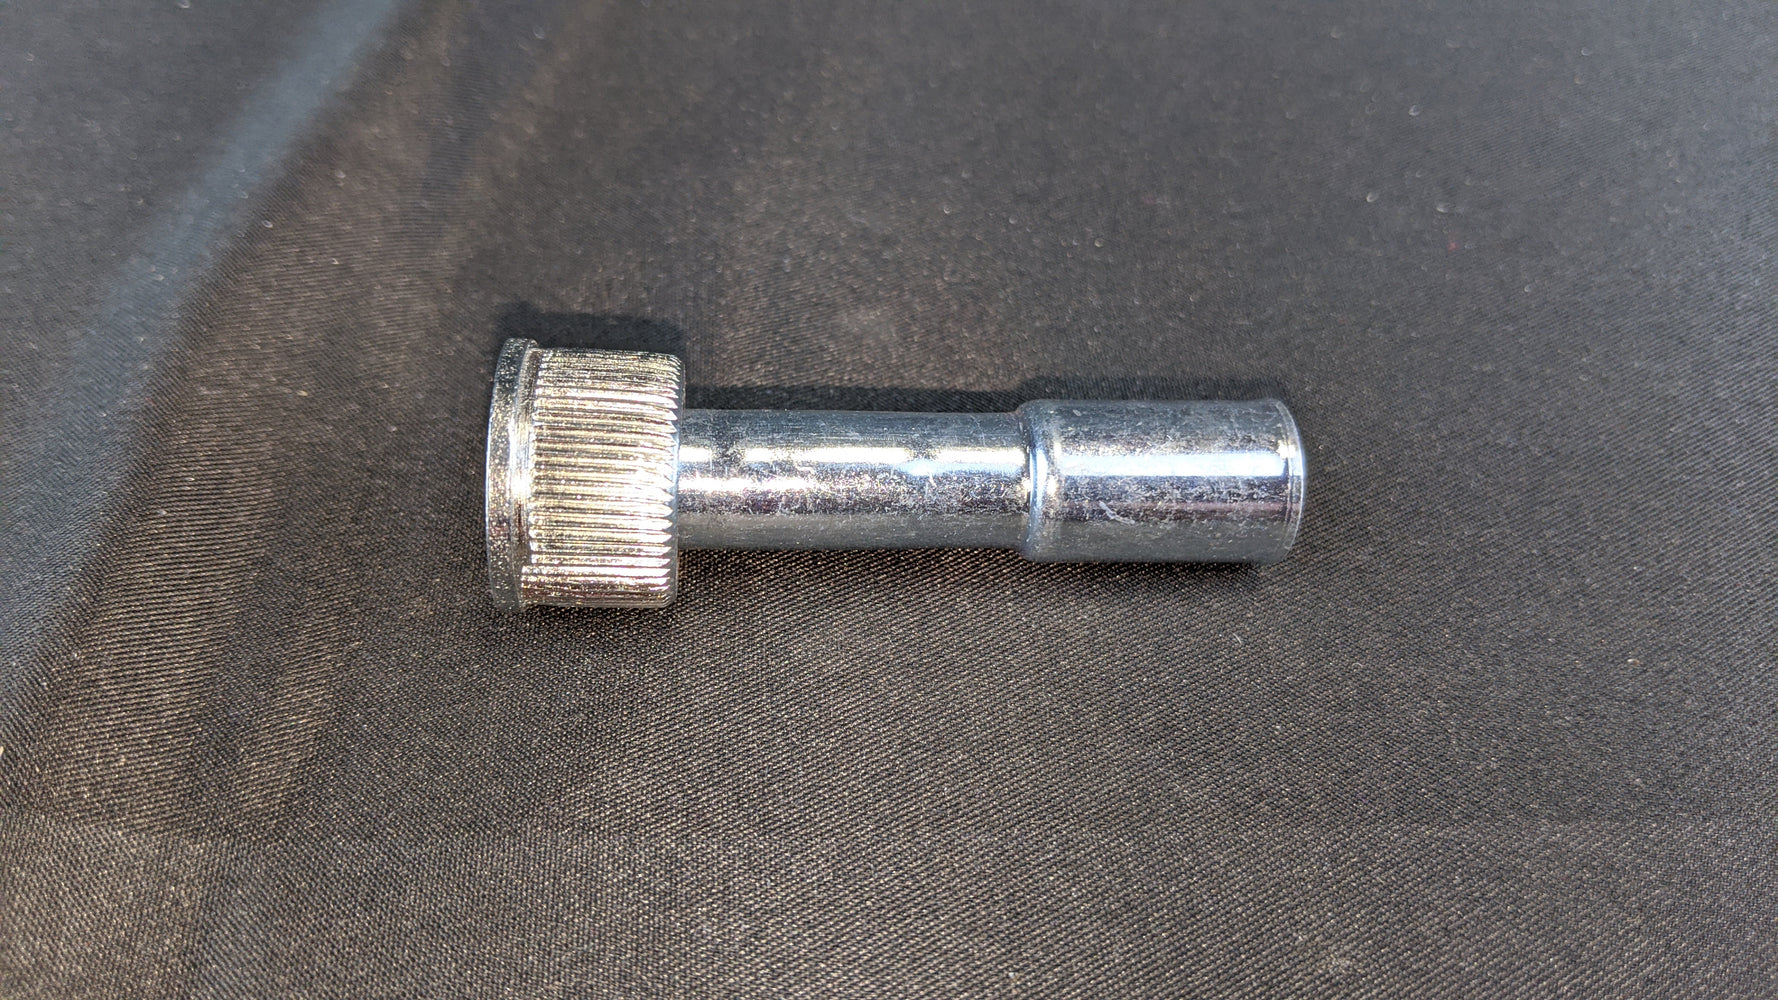 0.445 Ferrule with 5/8 Nut and Bushing - HF106